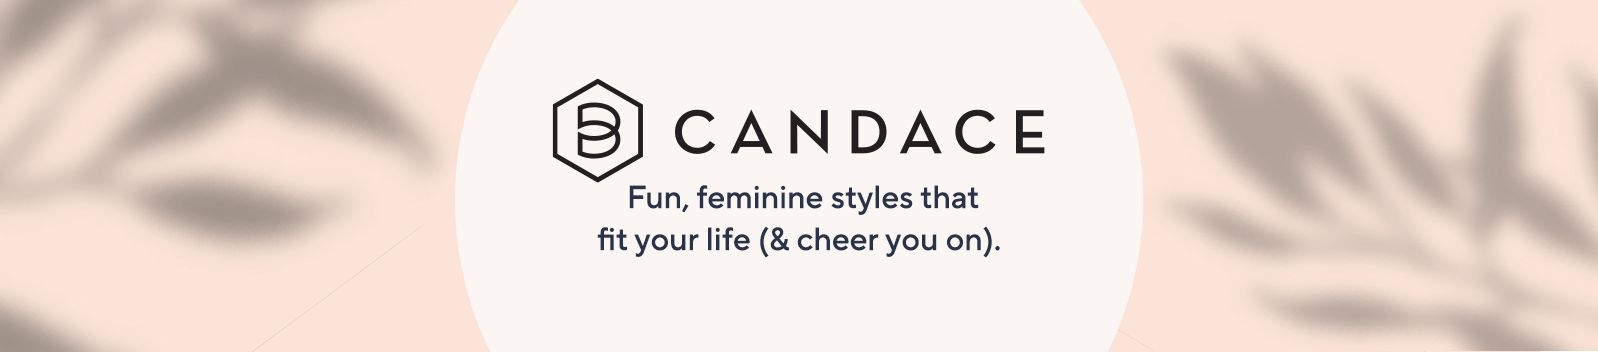 Candace Cameron Bure.  Fun, feminine styles that fit your life (& cheer you on).